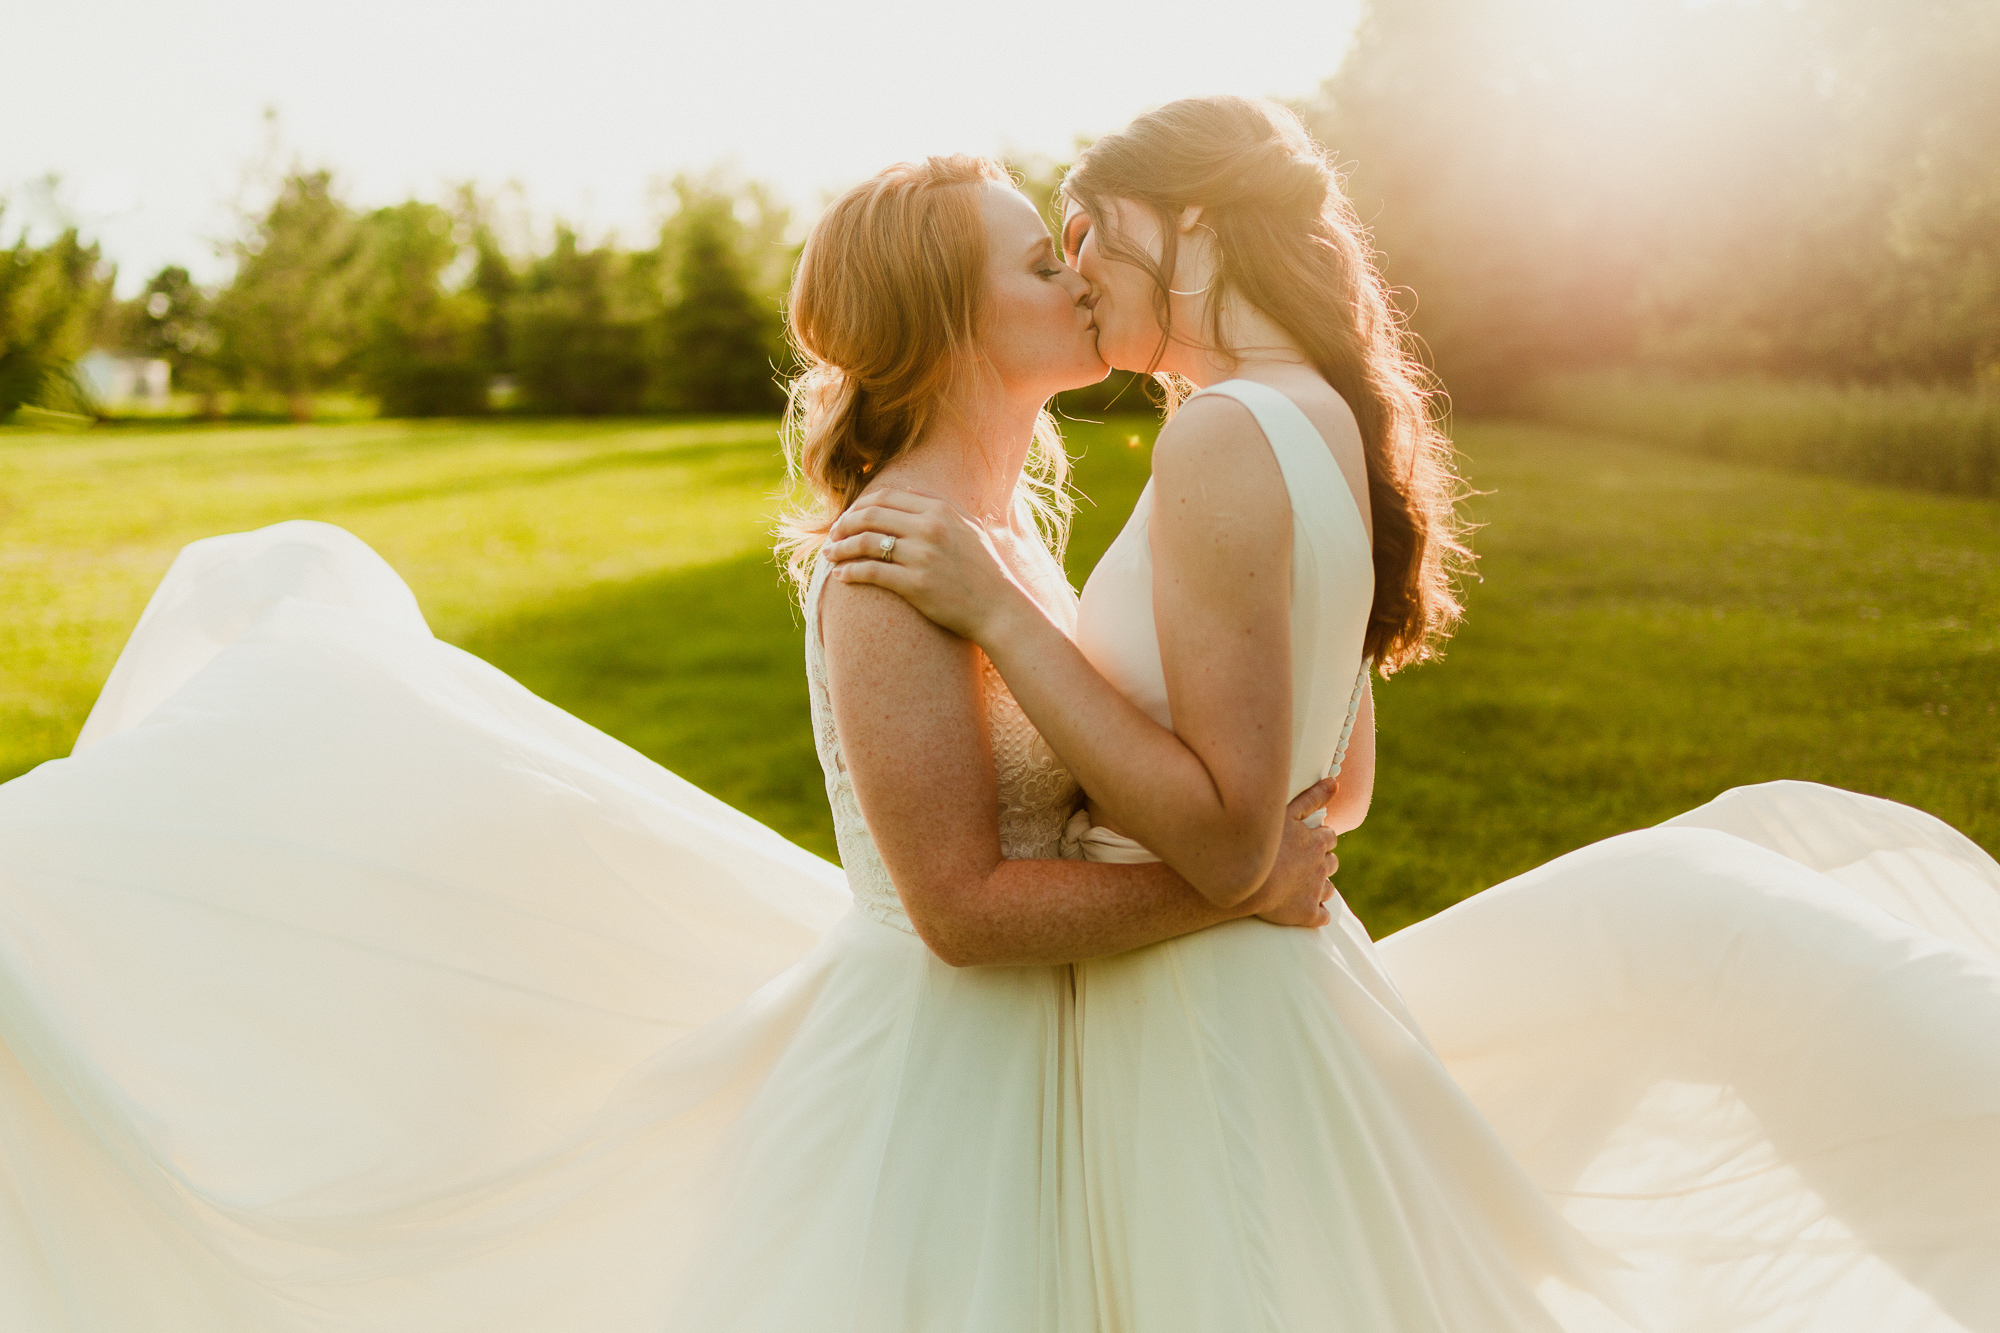 PRIDE | Queer Couple | LOVE IS LOVE | Wedding Gown